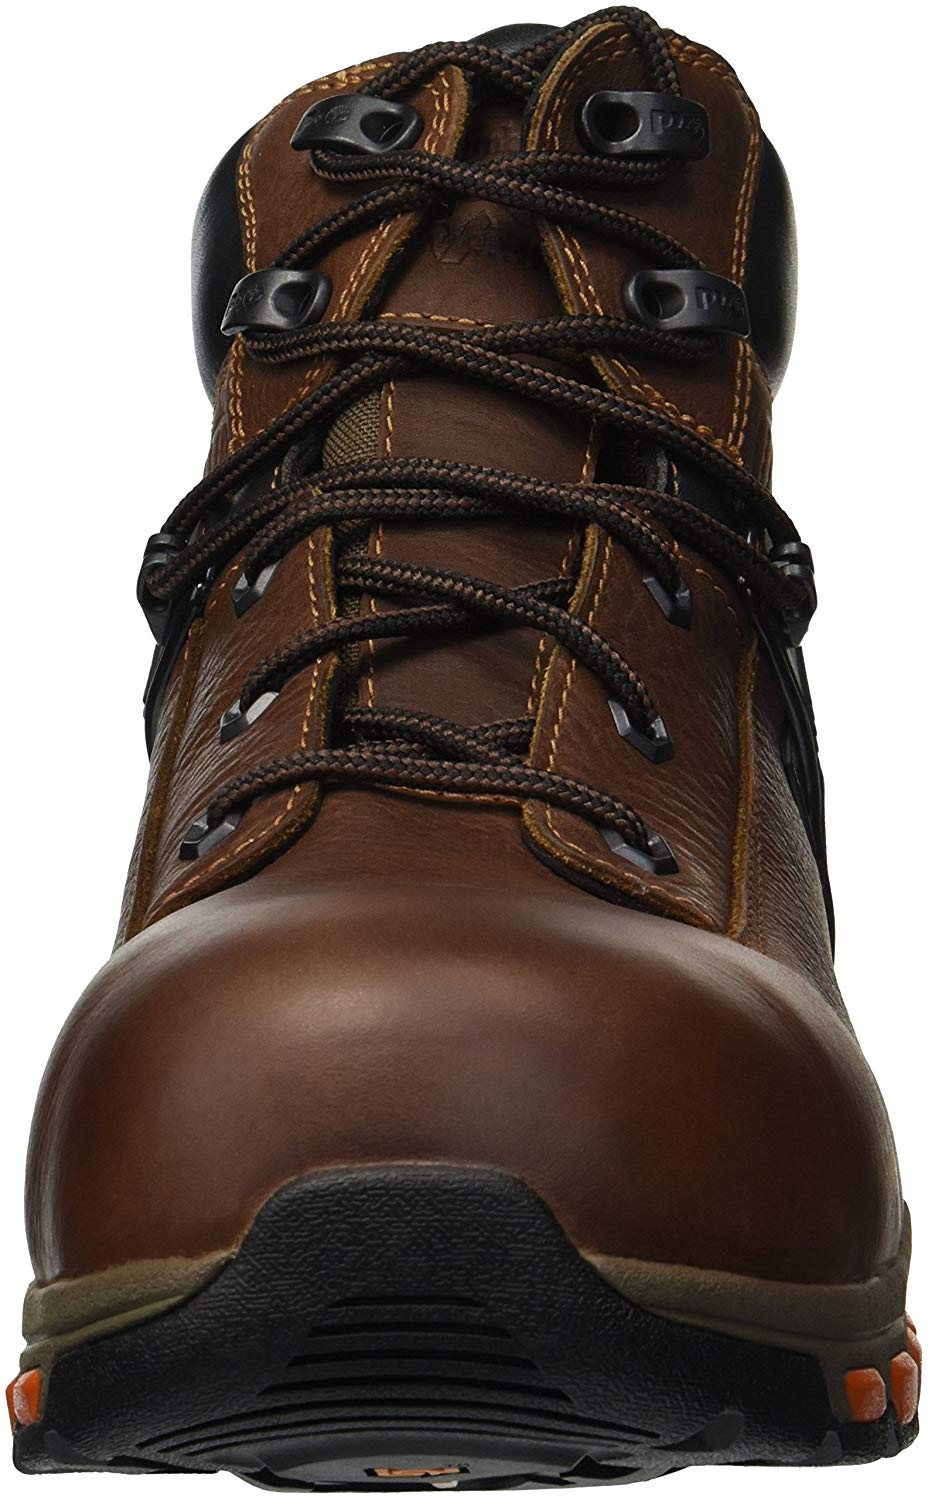 Timberland Mens TB0A1Q54214 Fabric Almond Toe Ankle Safety, Brown, Size